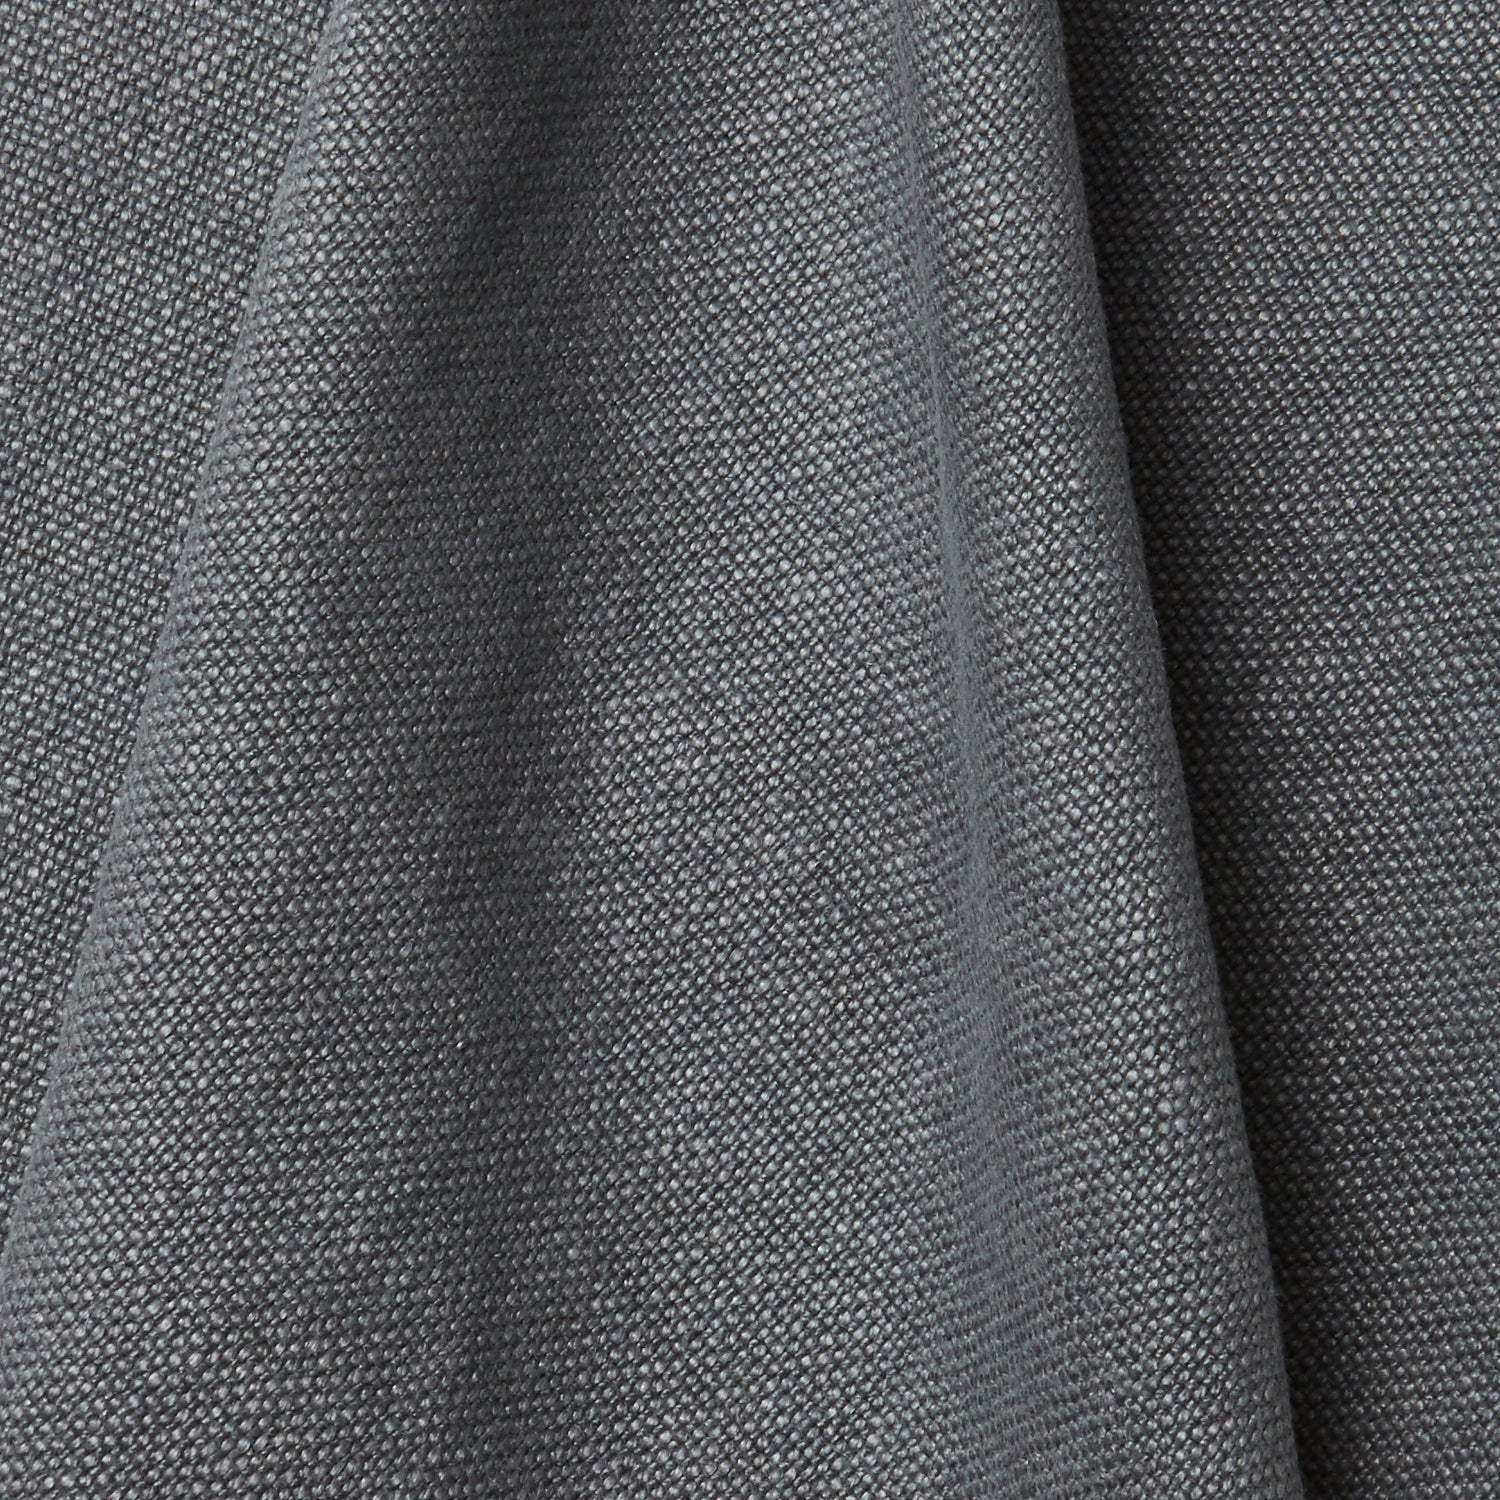 A draped swatch of old-world linen fabric in a solid dark gray color.